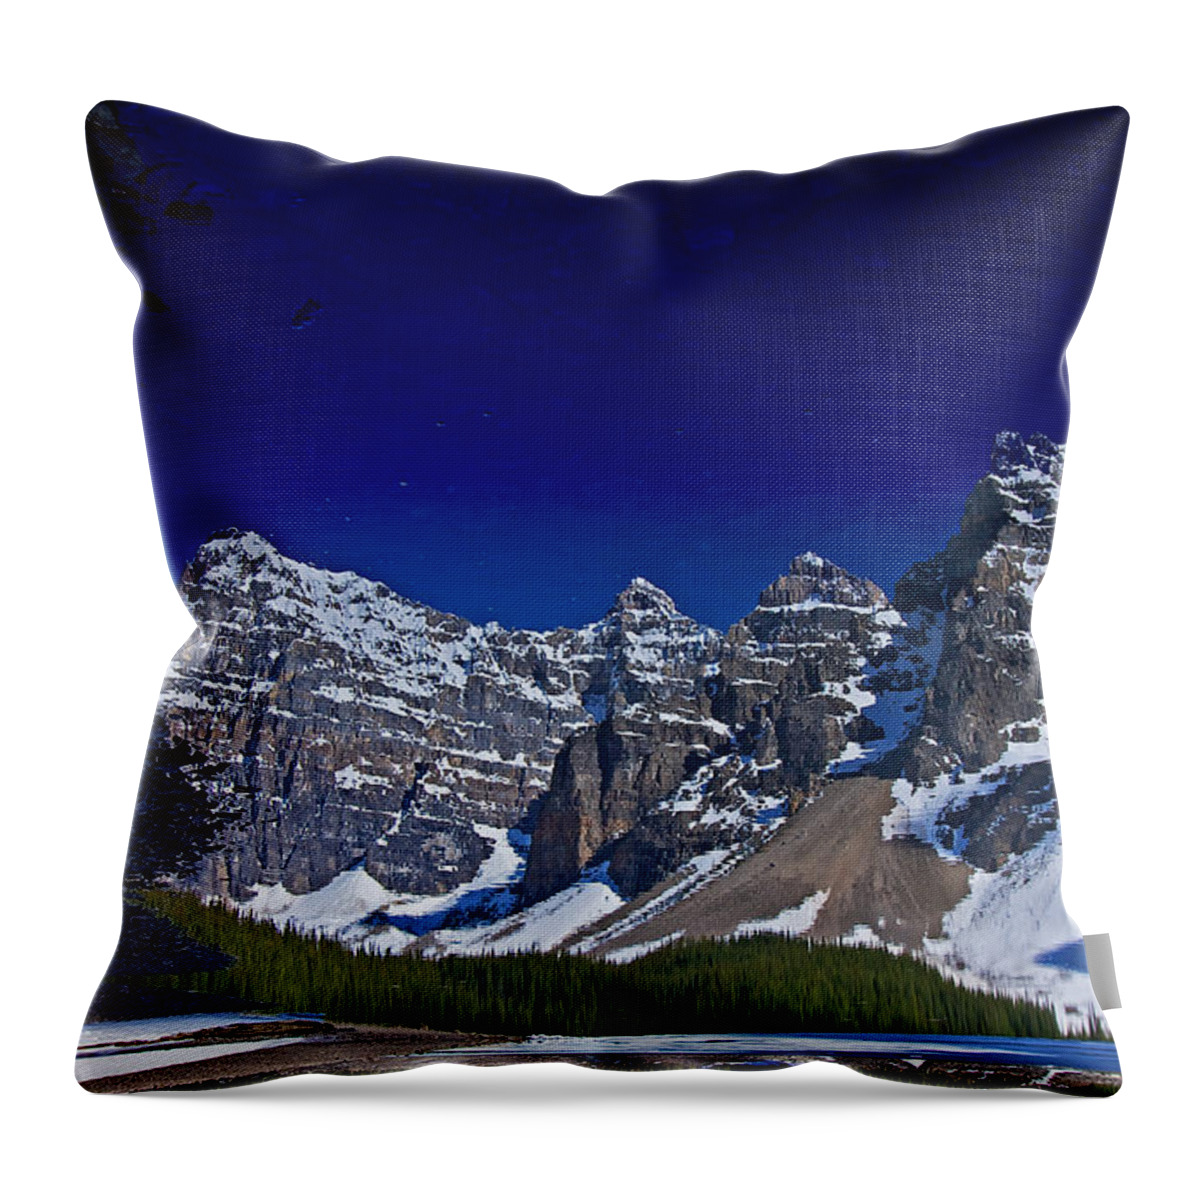 Moraine Lake Throw Pillow featuring the photograph Moraine Lake Reflection by Stuart Litoff